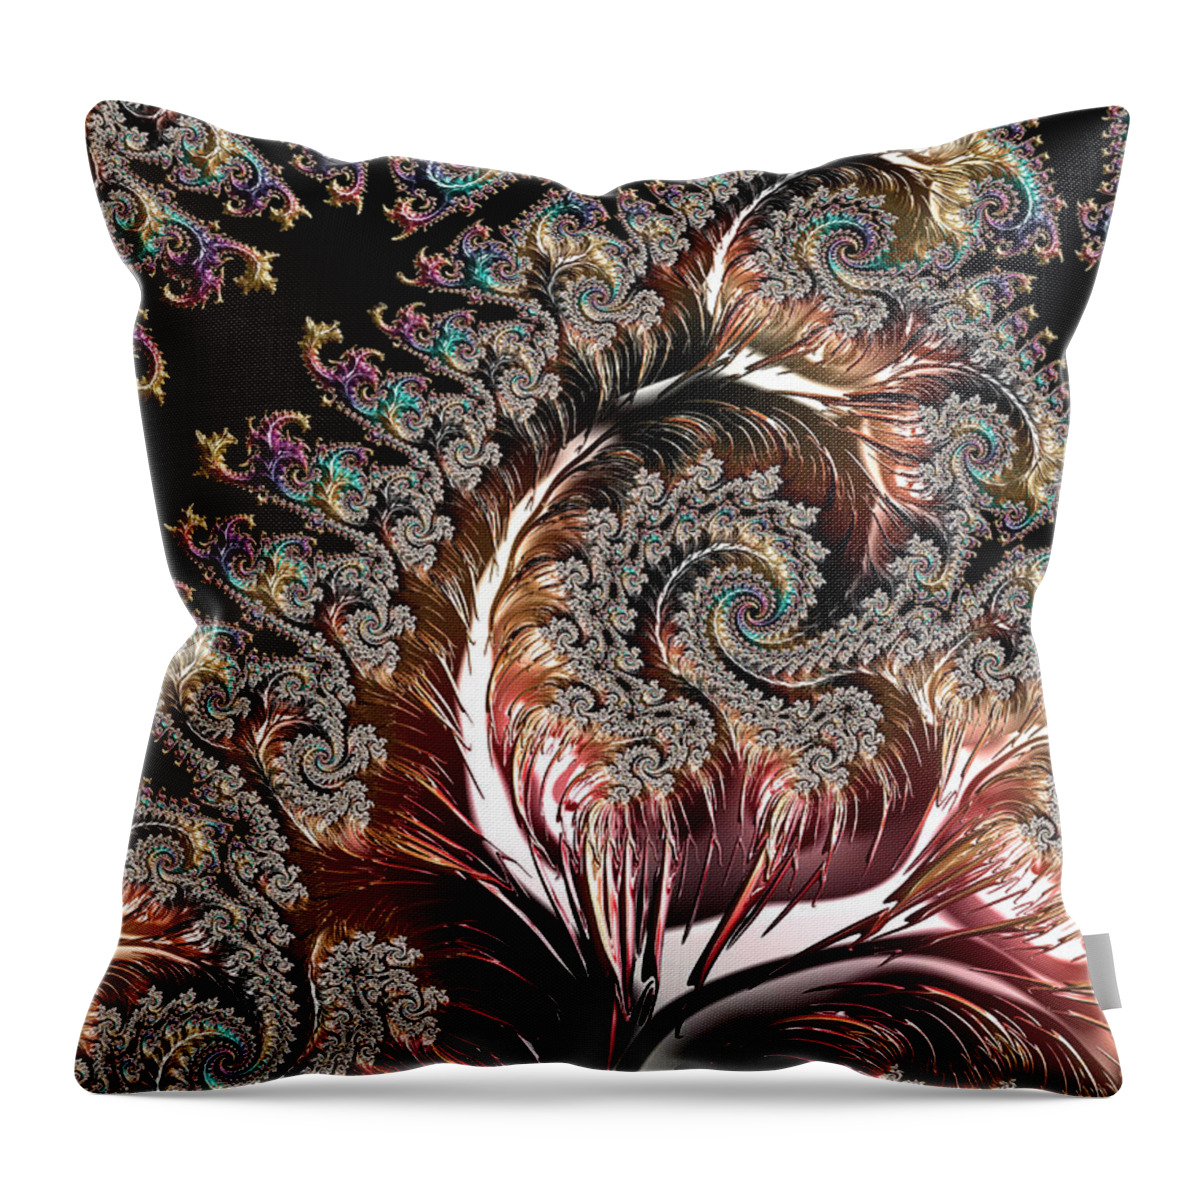 Abstract Throw Pillow featuring the digital art Swirls and Roots by Michele A Loftus